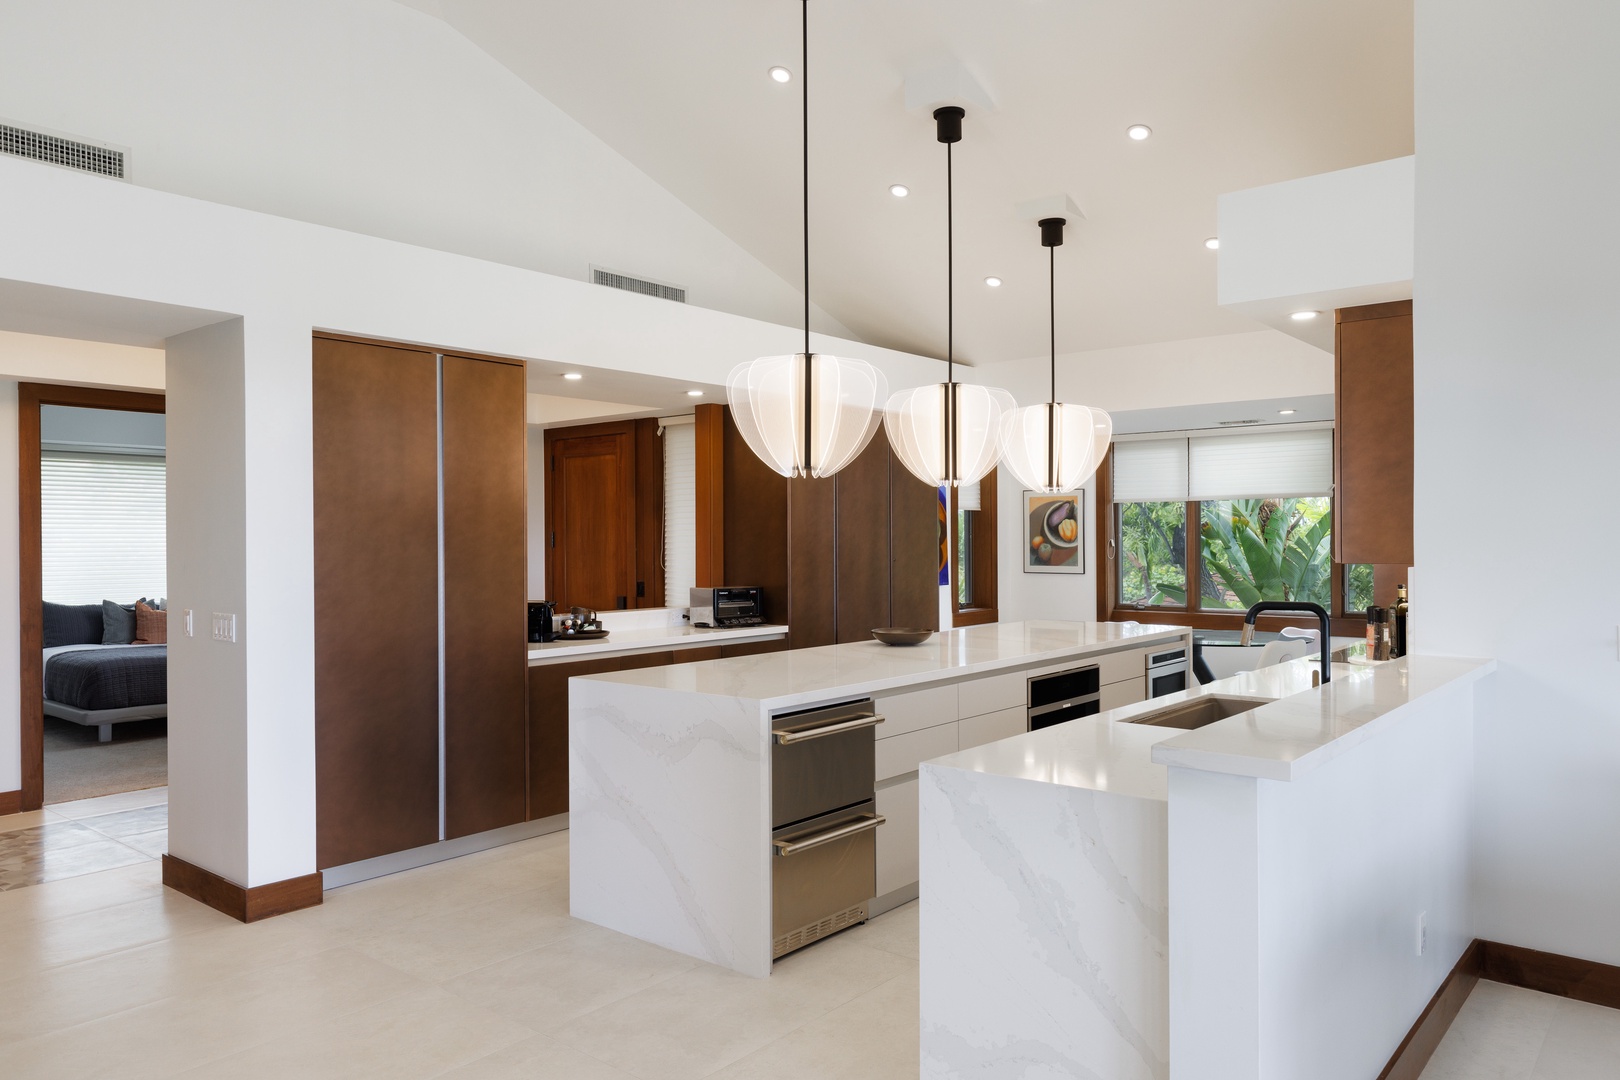 Kailua Kona Vacation Rentals, 3BD Fairways Villa (104A) at Four Seasons Resort at Hualalai - Elegantly appointed kitchen with lots of counter spaces to play.